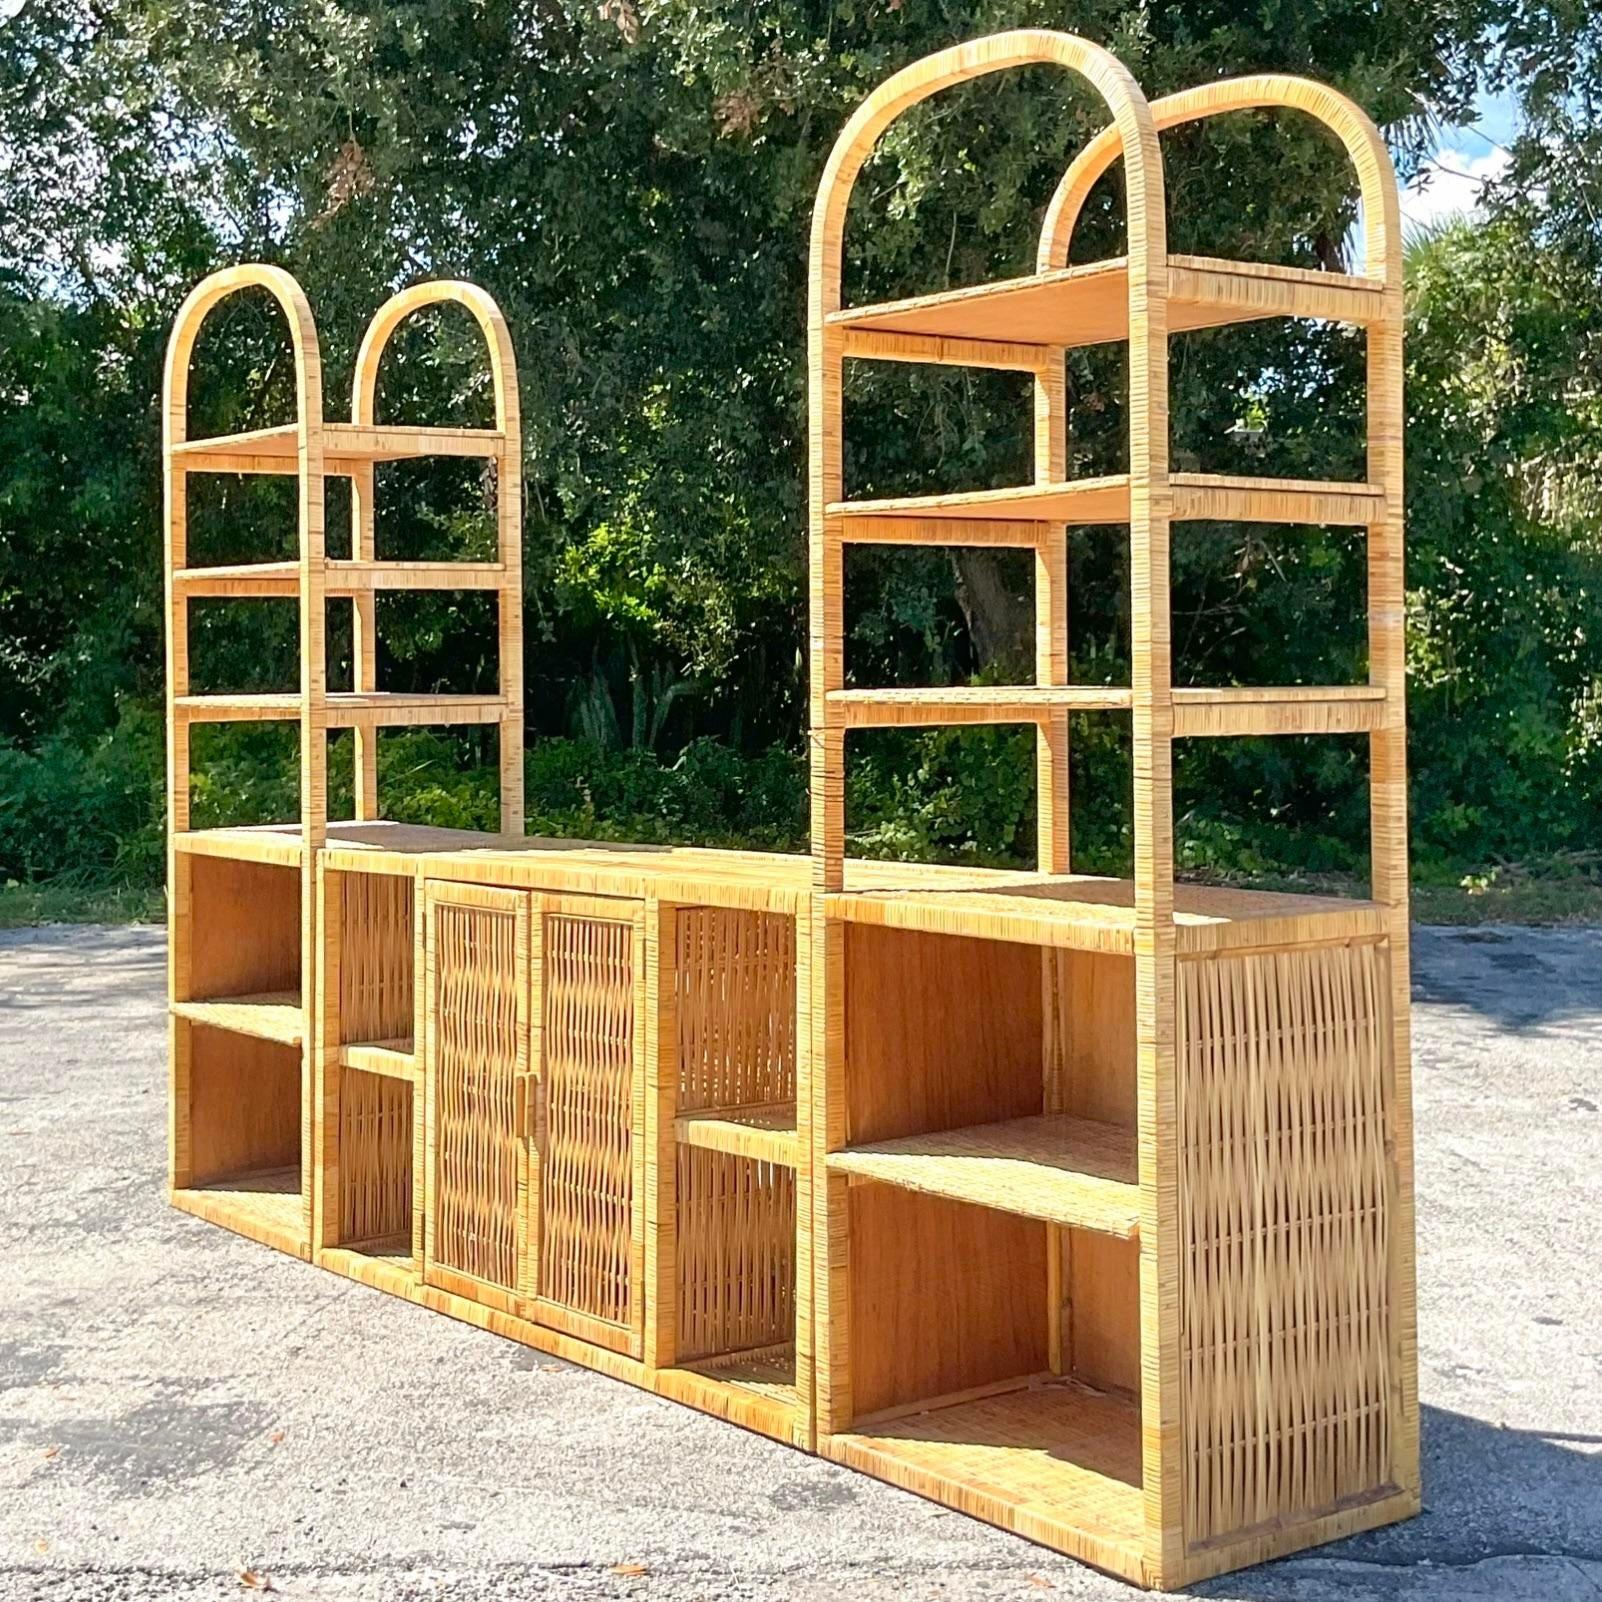 A fabulous pair of vintage Costal etagere. A chic arched design with a wrapped rattan frame. Deep set shelving with lots of great storage below. Can be added to the ends of a coordinating credenza for a killer wall unit. The credenza is also